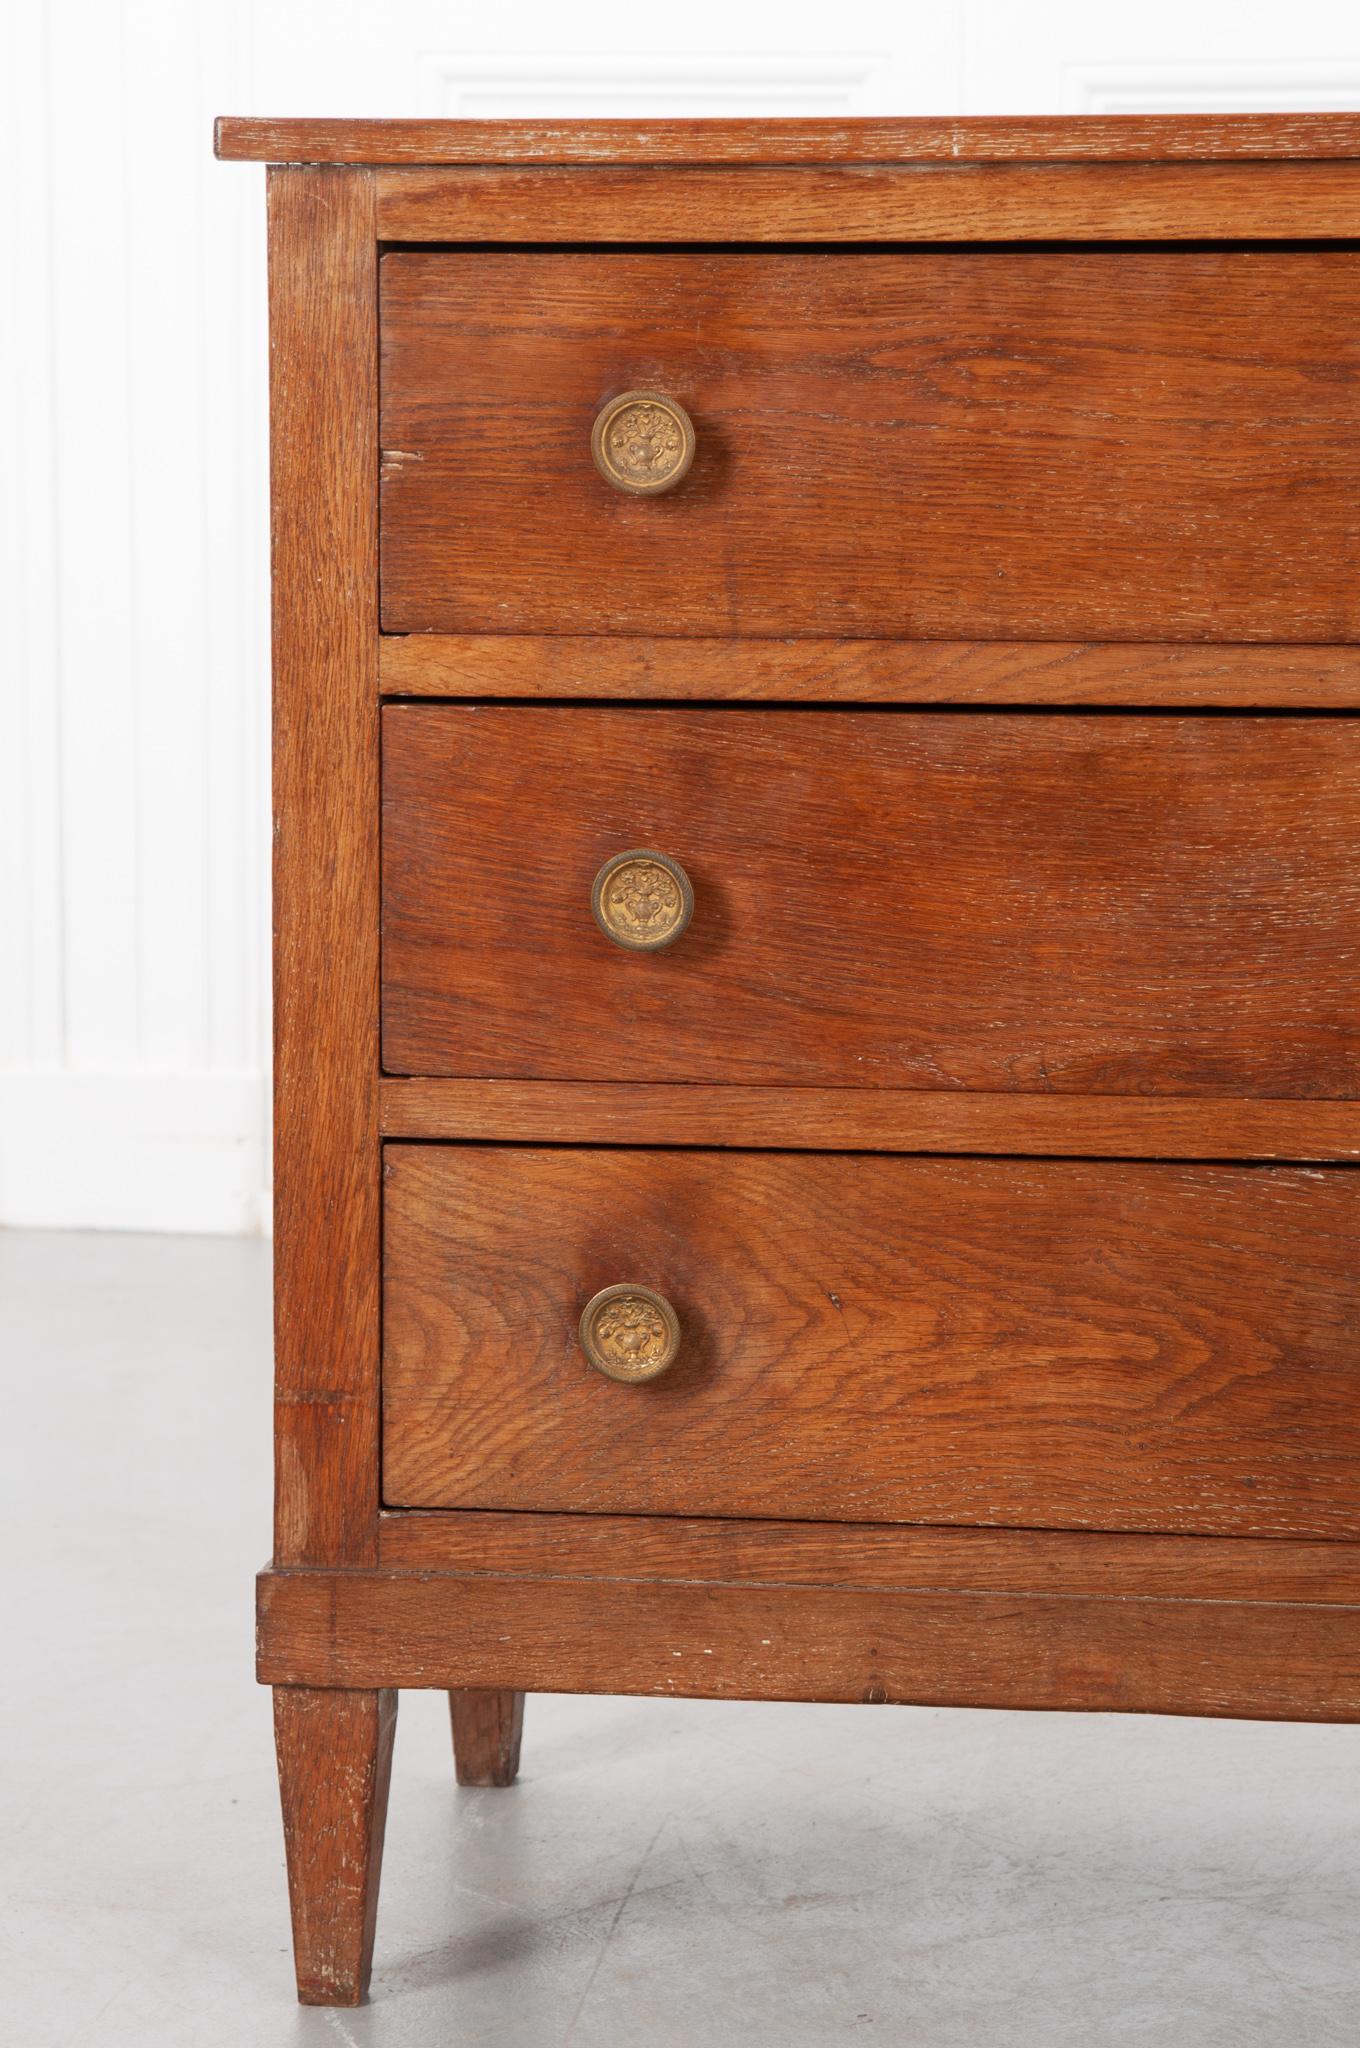 A handsome three drawer commode stripped of paint and polished. It has beautiful oak tones. The lines are simple, but it is dressed up by the lovely details of the brass knobs – a vase of flowers. The drawers have no keys. They do have matching